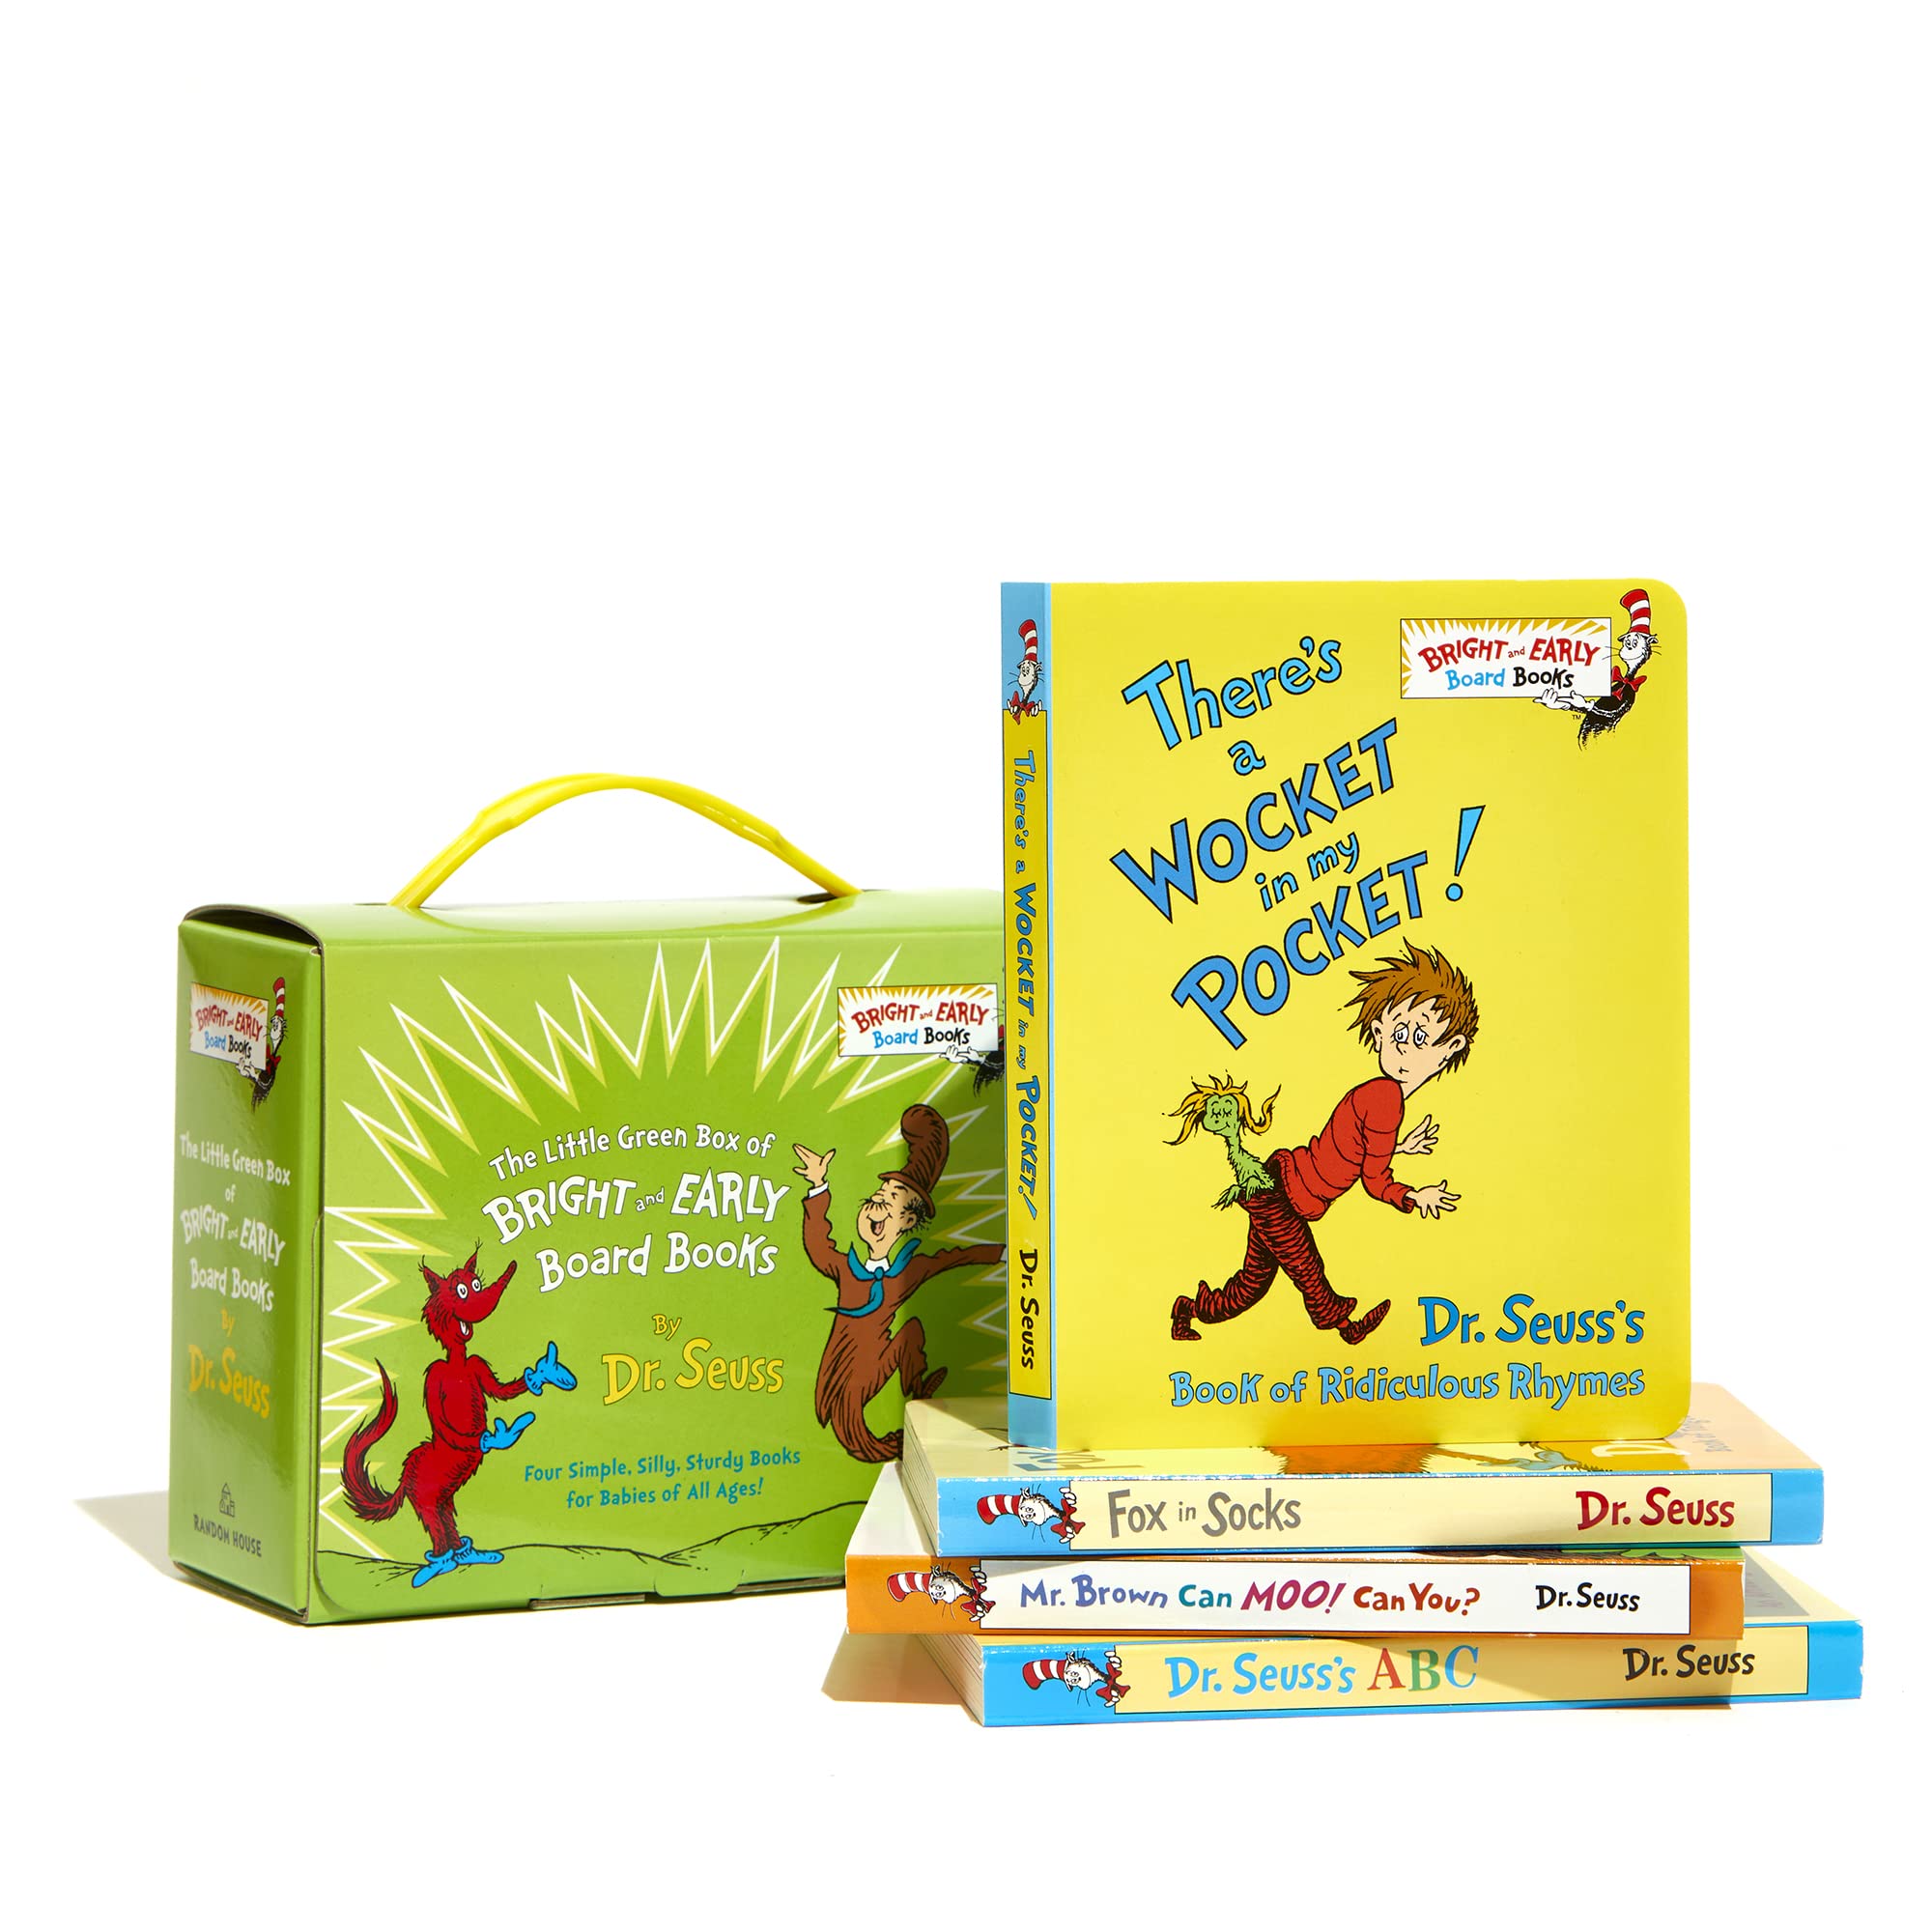 Little Green Box of Bright and Early Board Books: Fox in Socks; Mr. Brown Can Moo! Can You?; There's a Wocket in My Pocket!; Dr. Seuss's ABC (Bright & Early Board Books(TM))